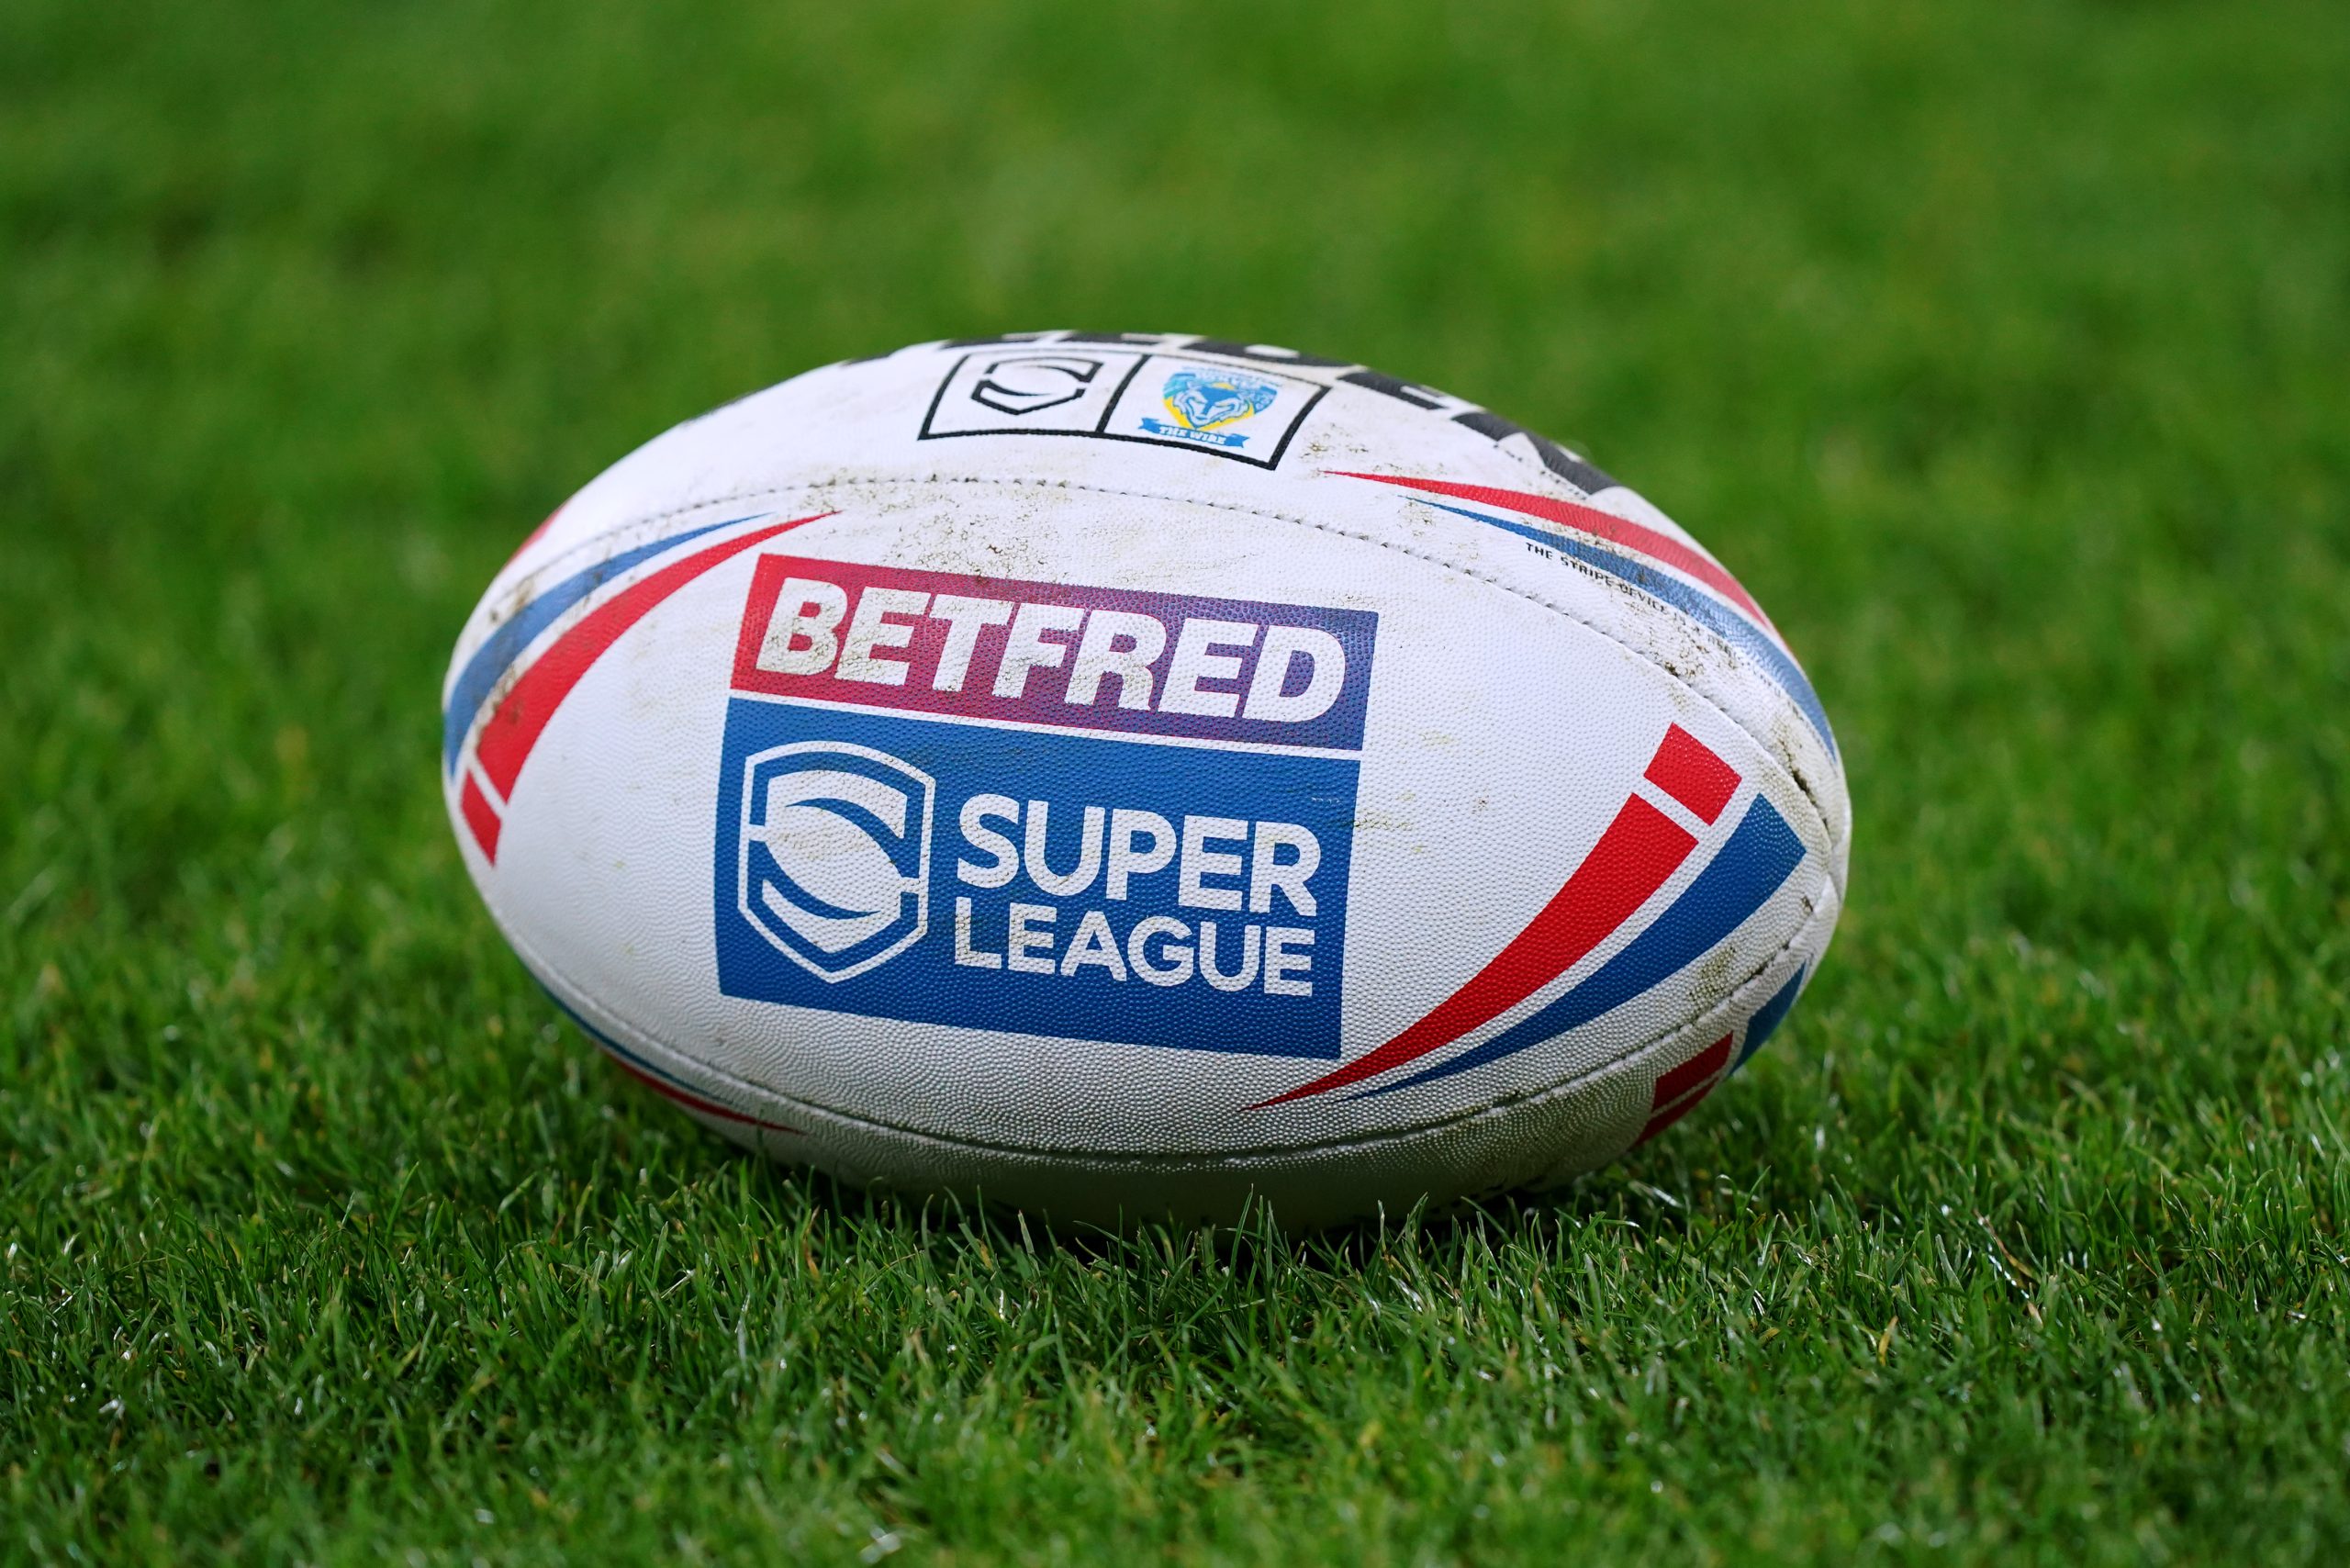 Automatic promotion and relegation in Betfred Super League to be scrapped